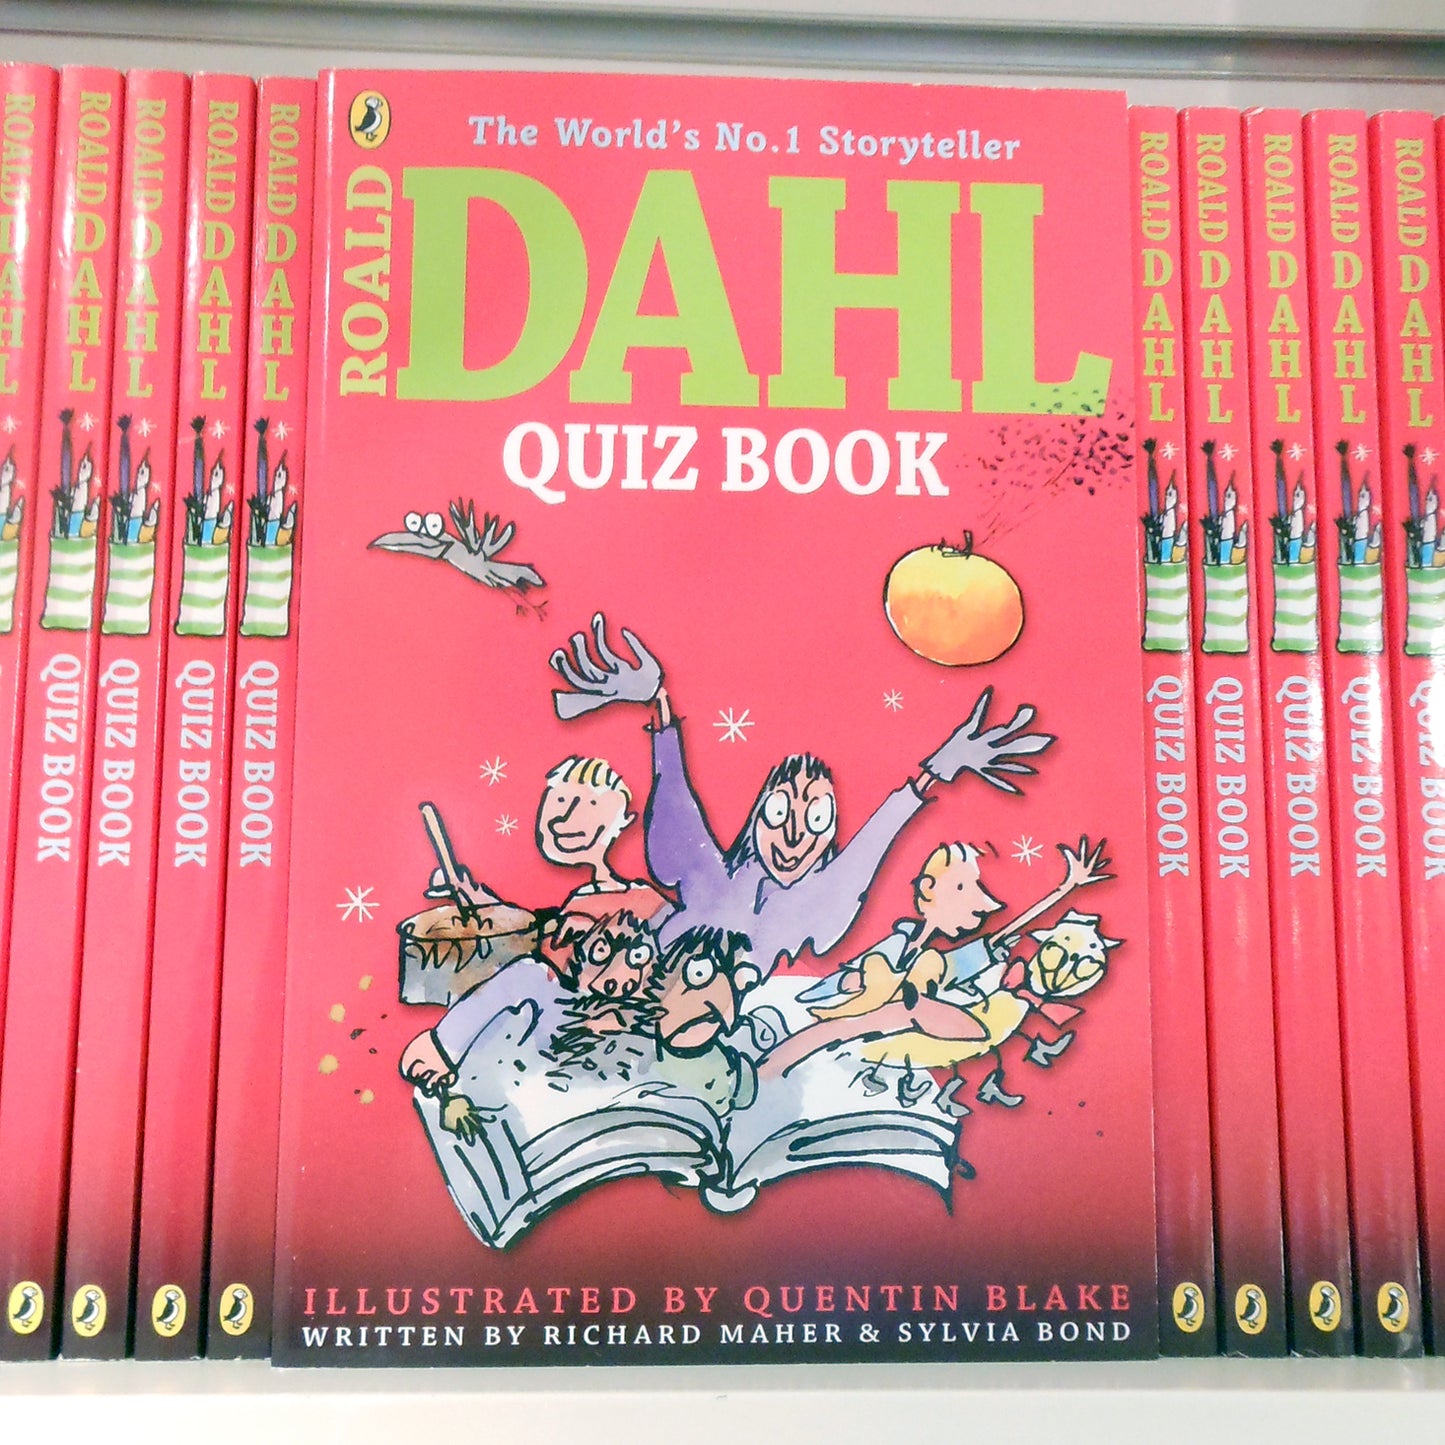 Quiz Book, from the stories of Roald Dahl and illustrated by Quentin Blake